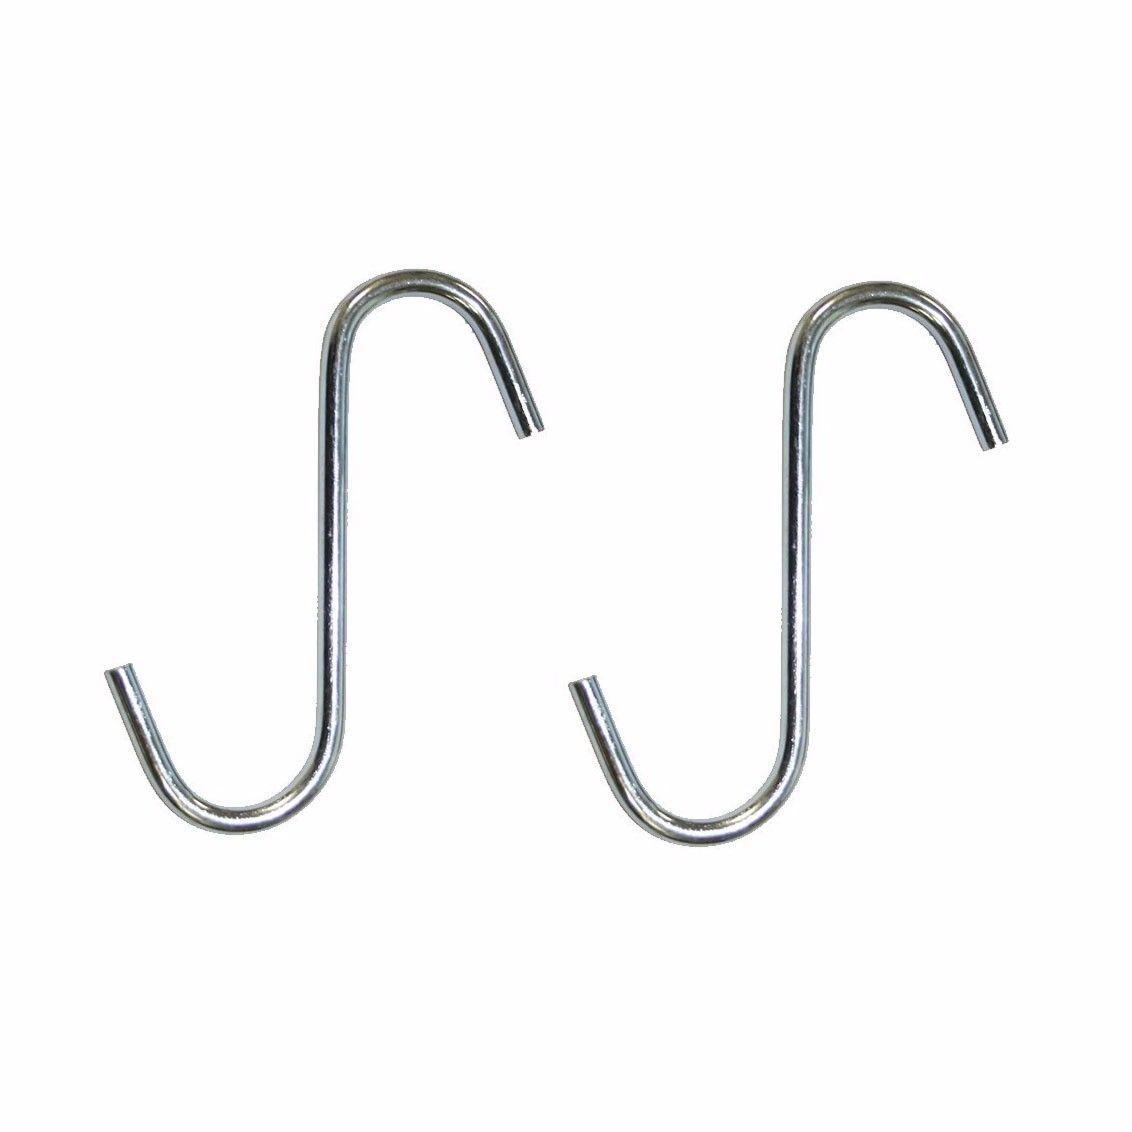 Value Pack 'S' Hooks 100mm Zinc Plated Pack Of 2 Kitchen 0976 (Large Letter Rate)